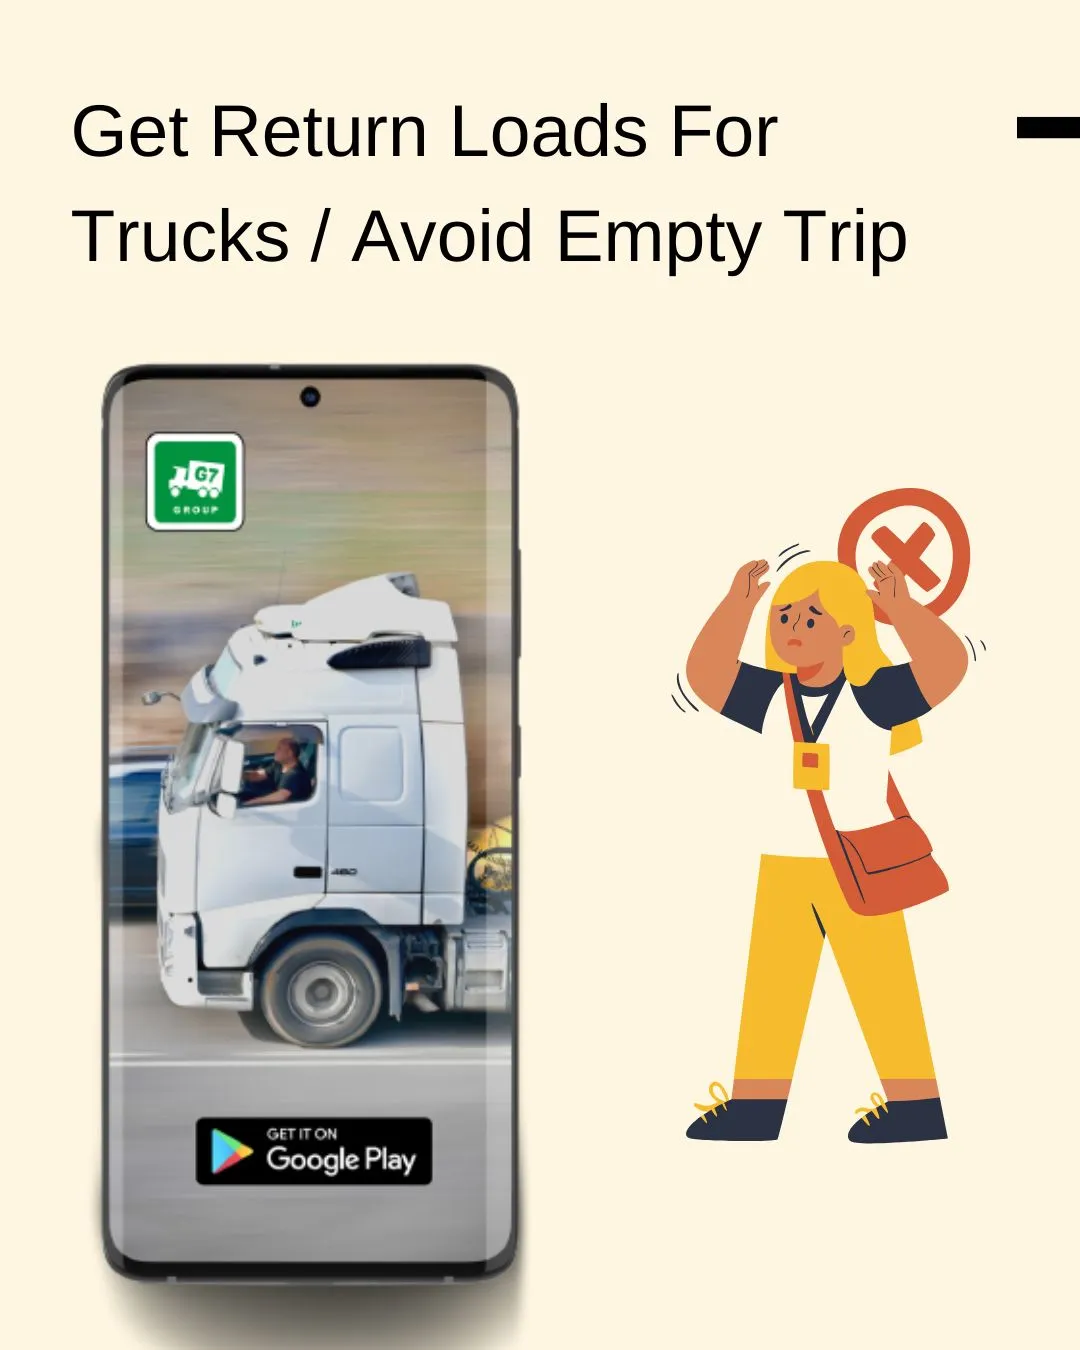 Image to Solve problem of Return Truck Load, Avoid Empty Truck in Return trip